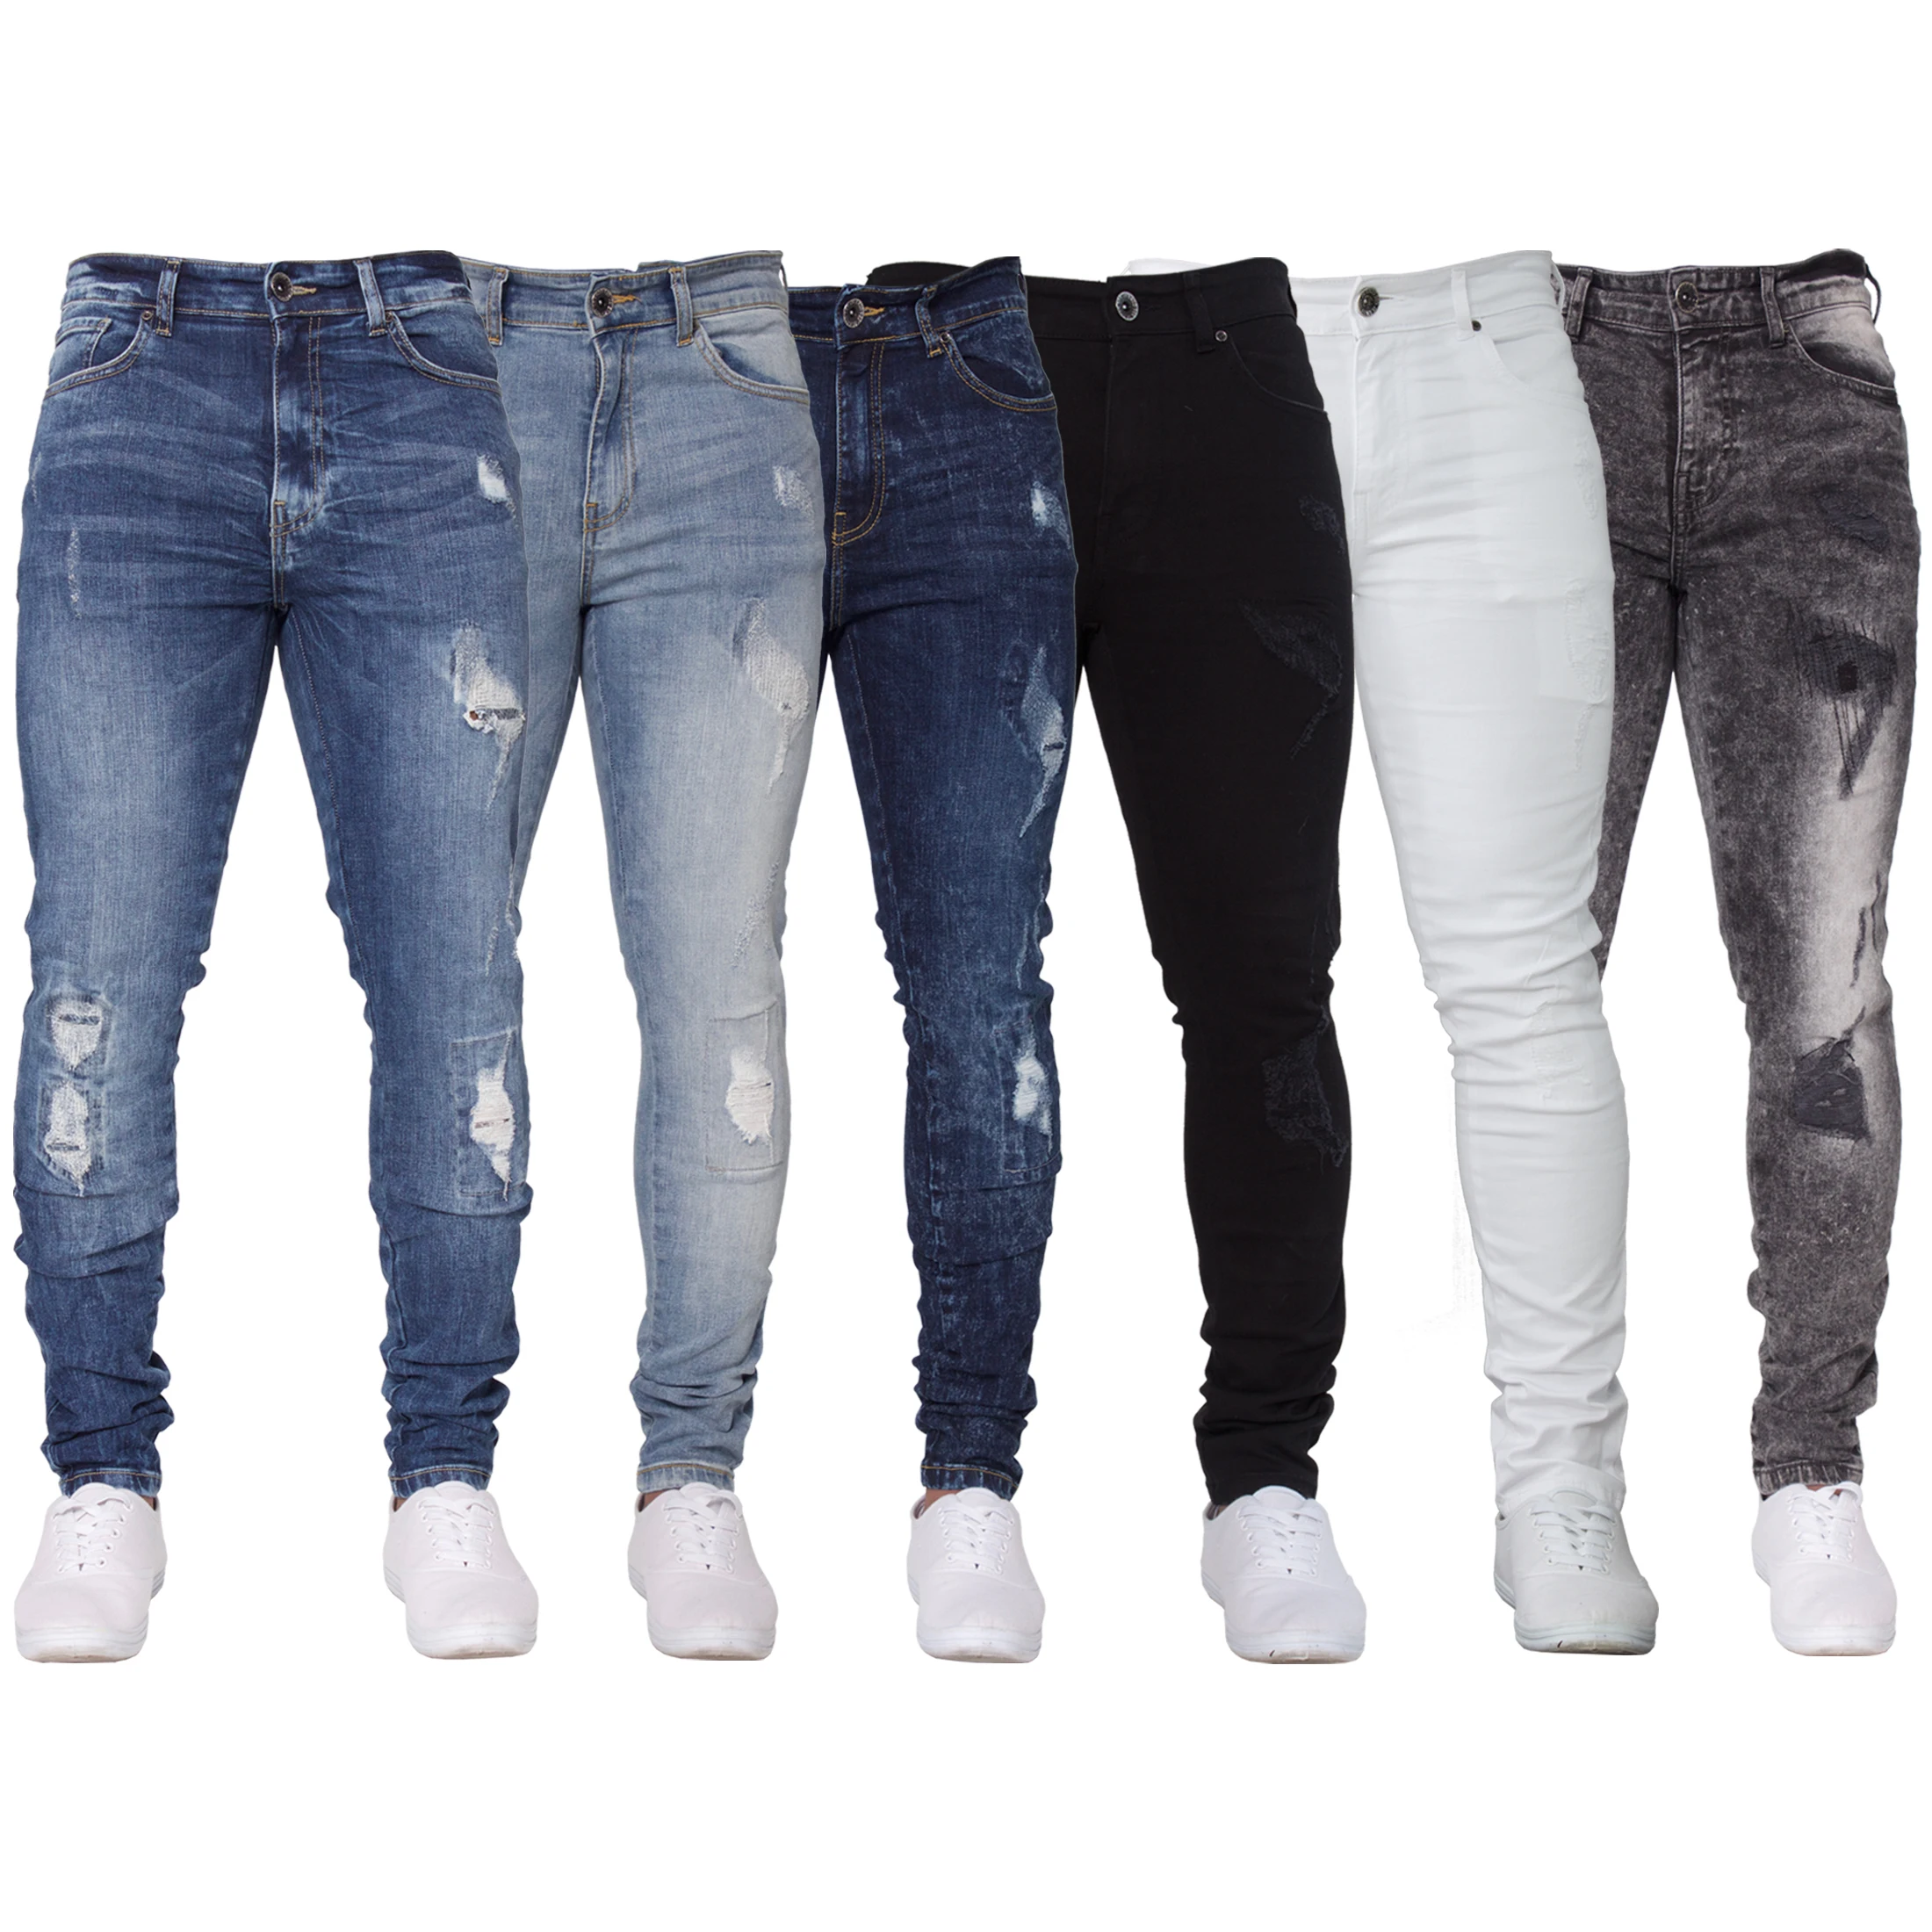 jeans trousers for men